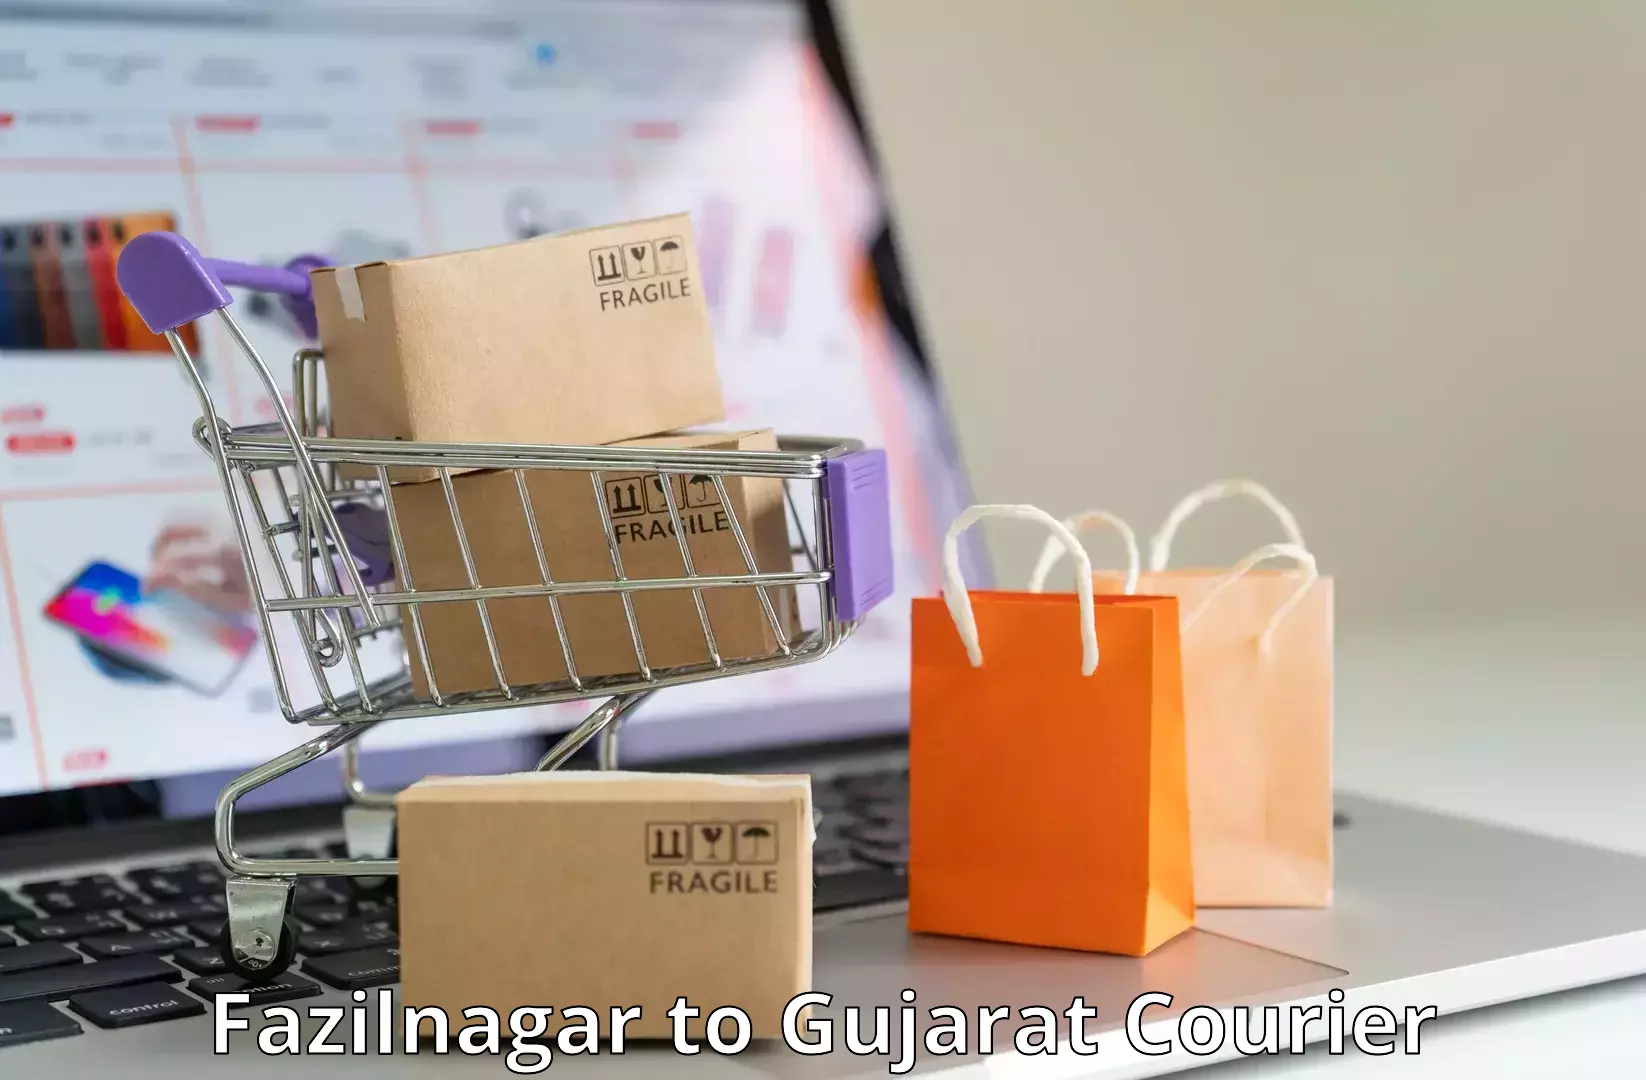 Subscription-based courier Fazilnagar to Ahmedabad